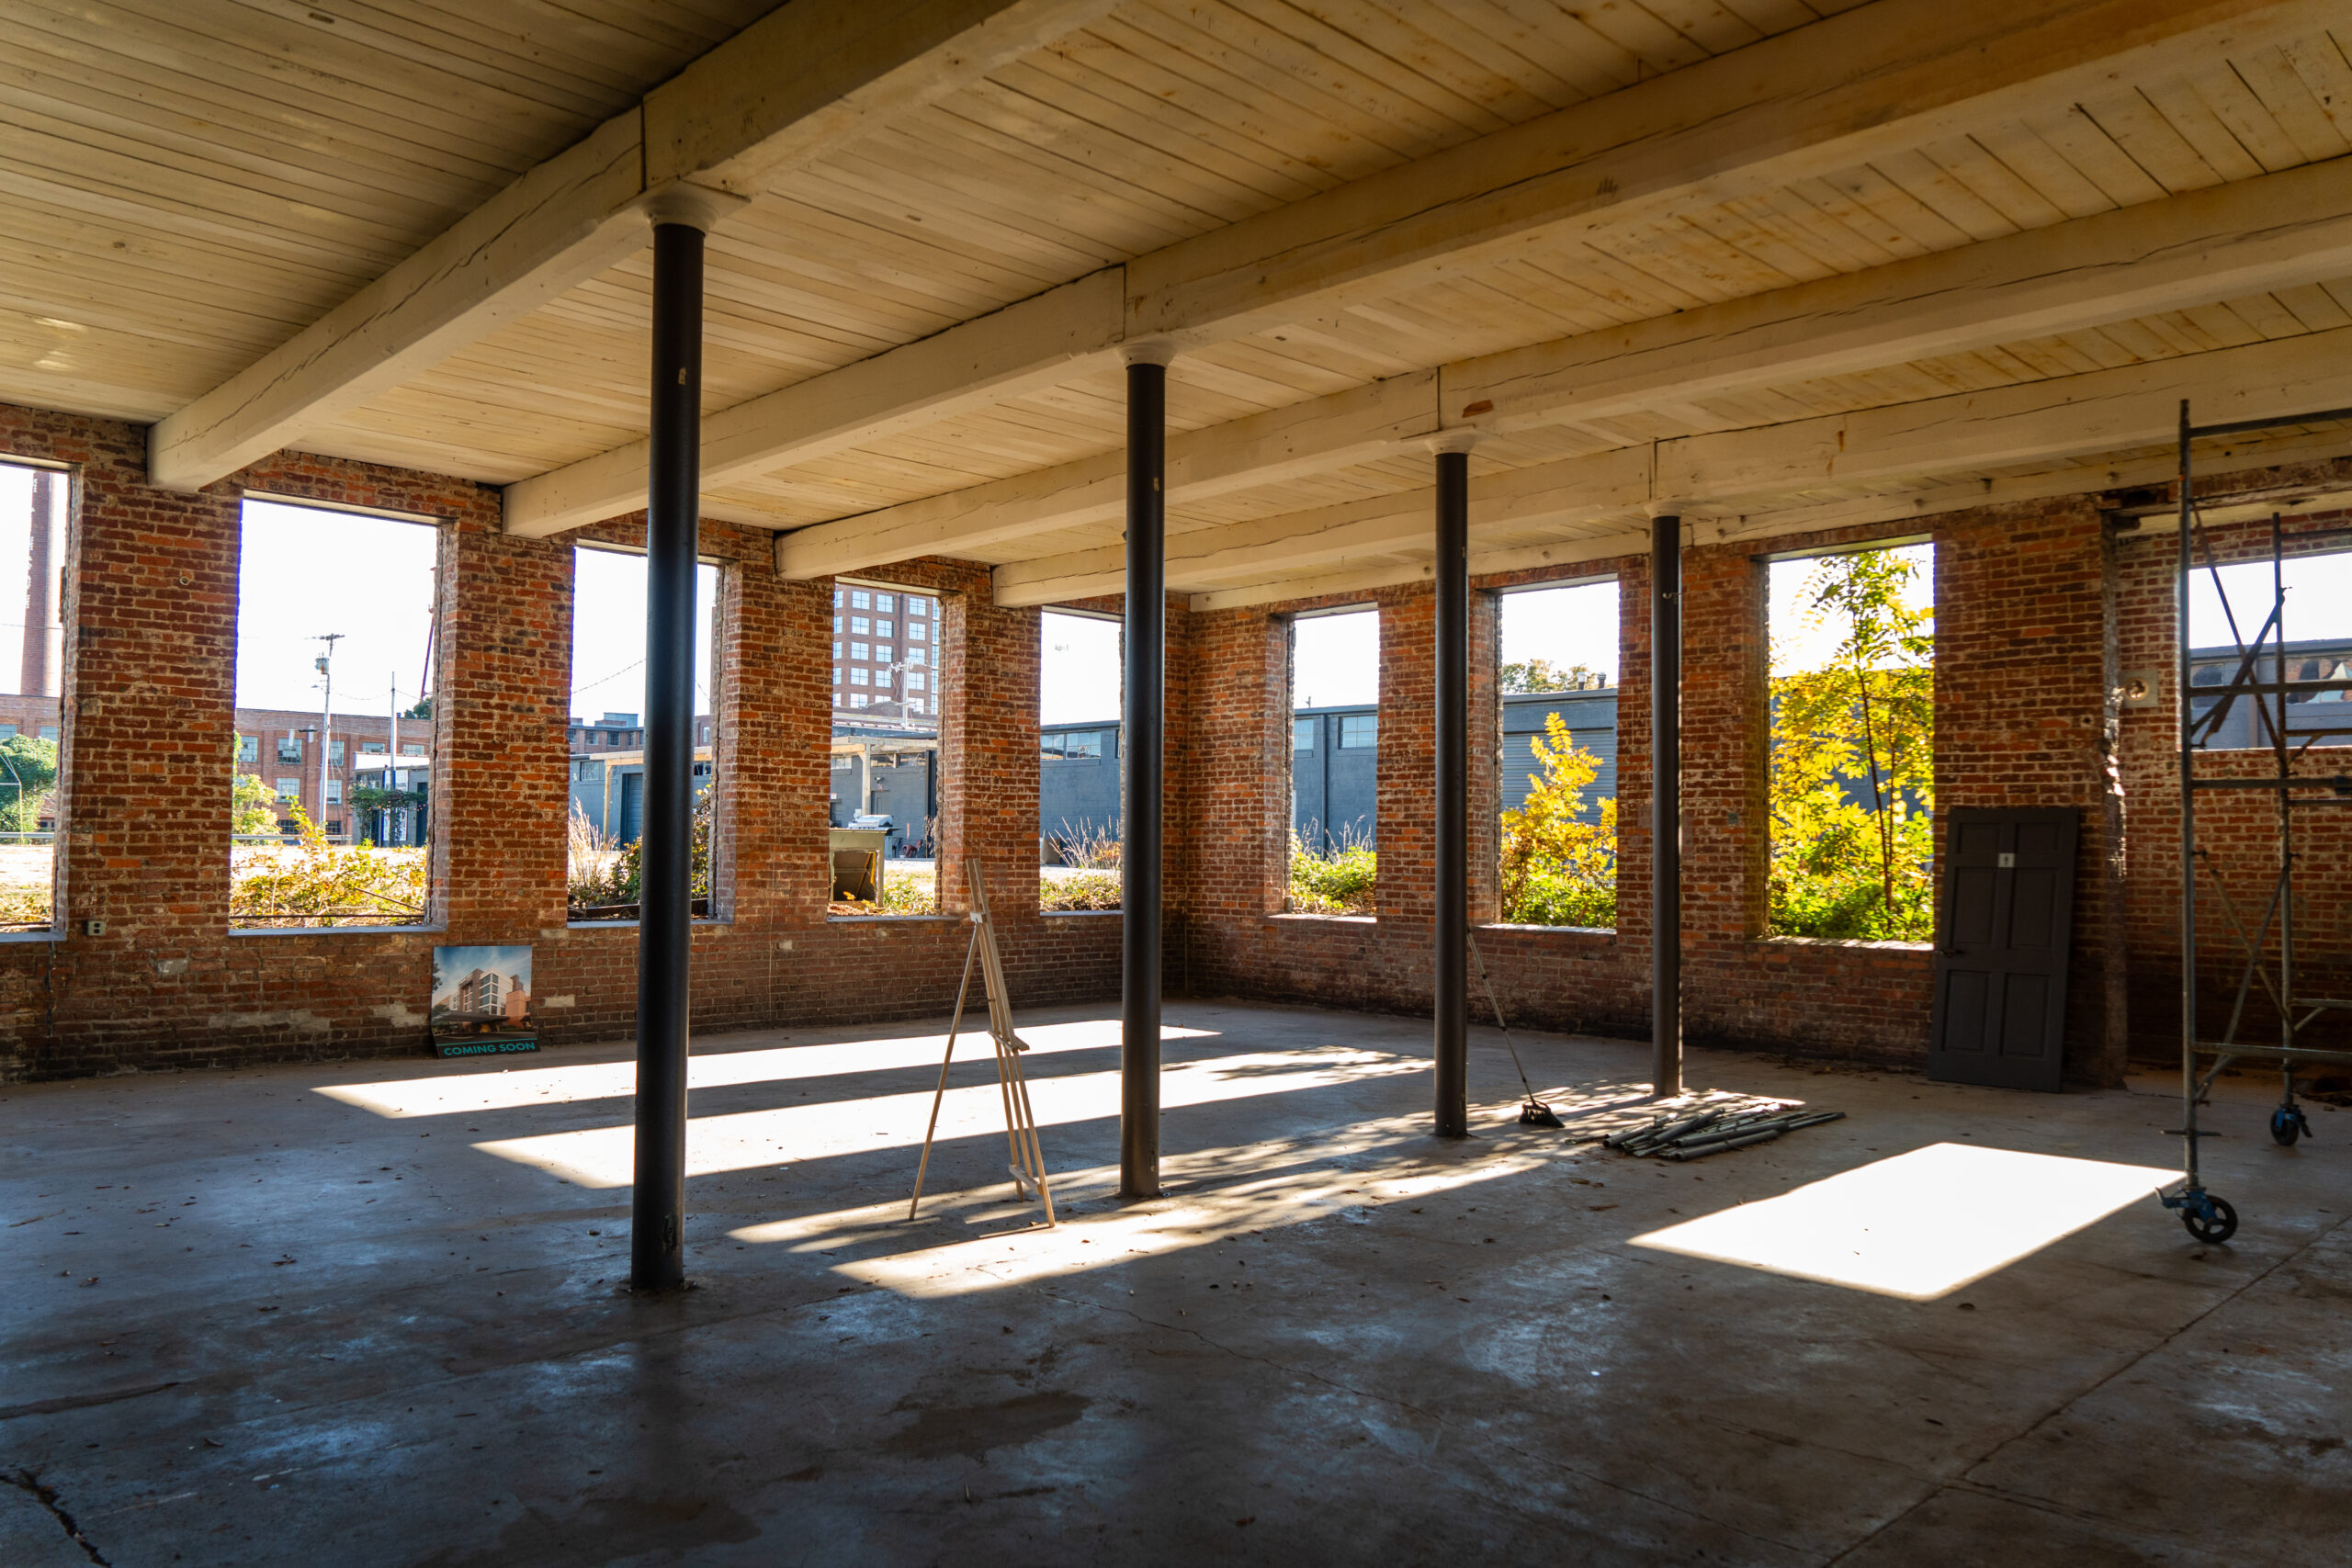 The original ground floor of the historic Adams Millis Hosiery Building, which will be renovated as part of Springhill Suites High Point, a hotel in downtown High Point, NC.